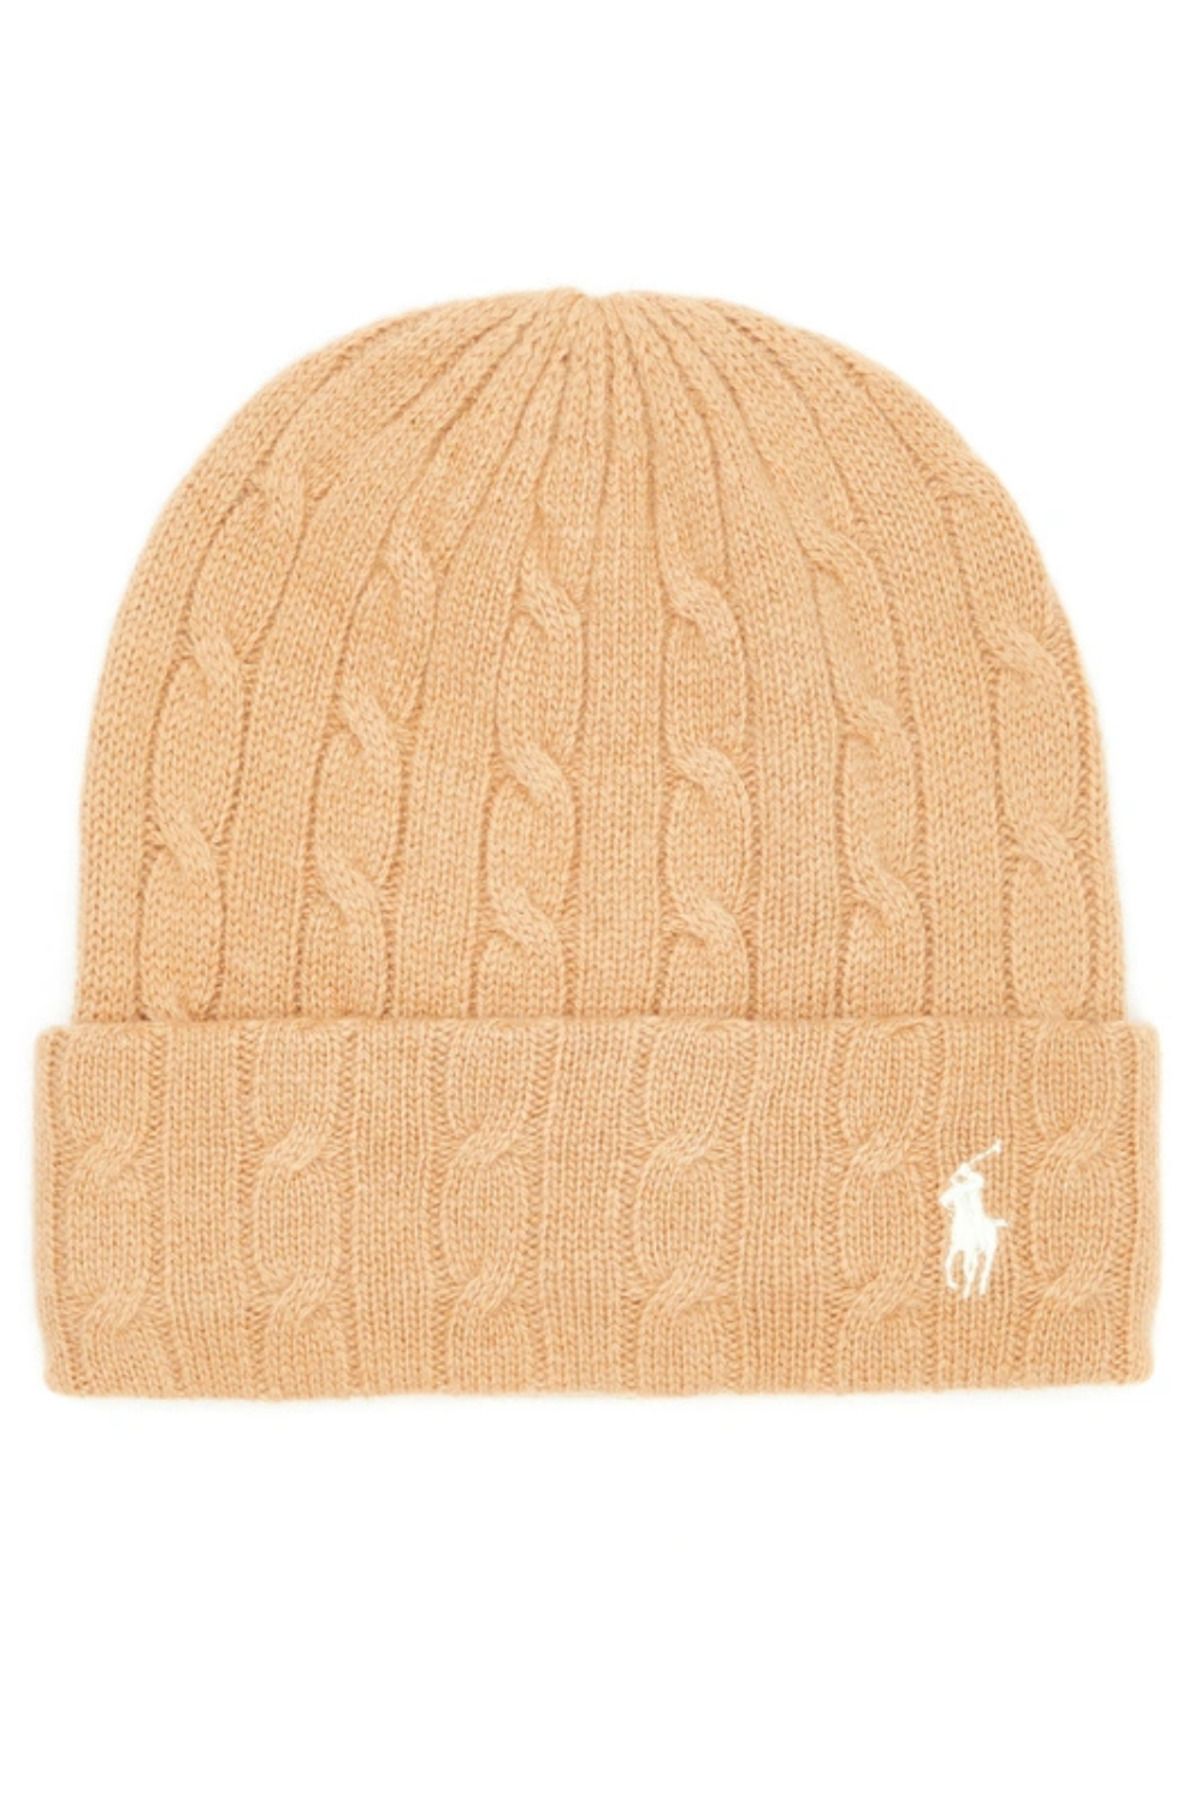 Ralph Lauren Logo Embroidered Wool & Cashmere Cable Beanie